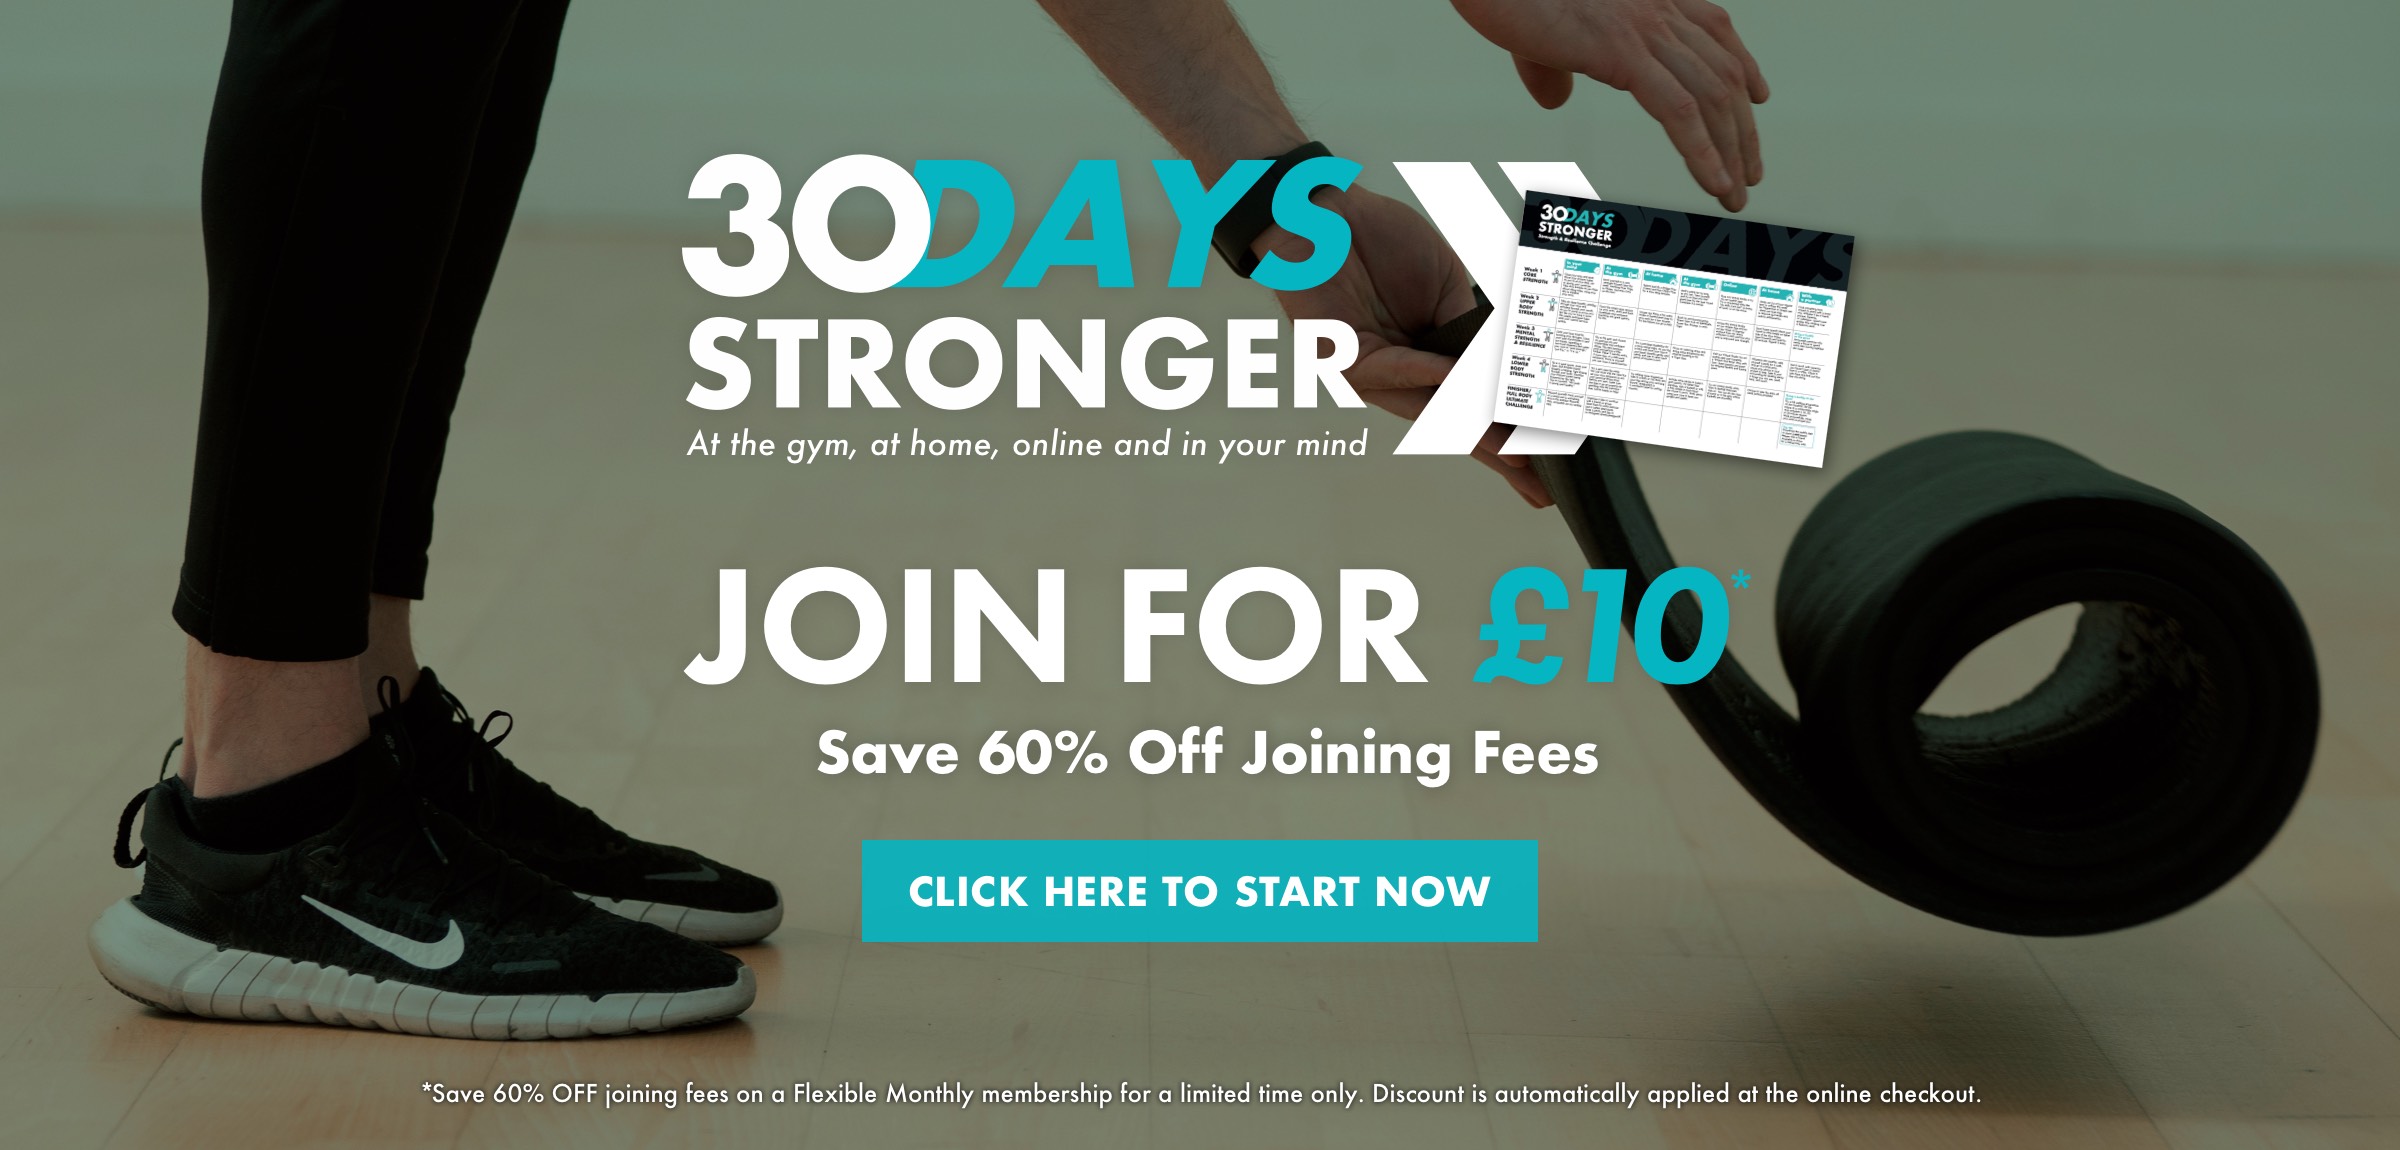 30 Days Stronger - Join Gym for £10